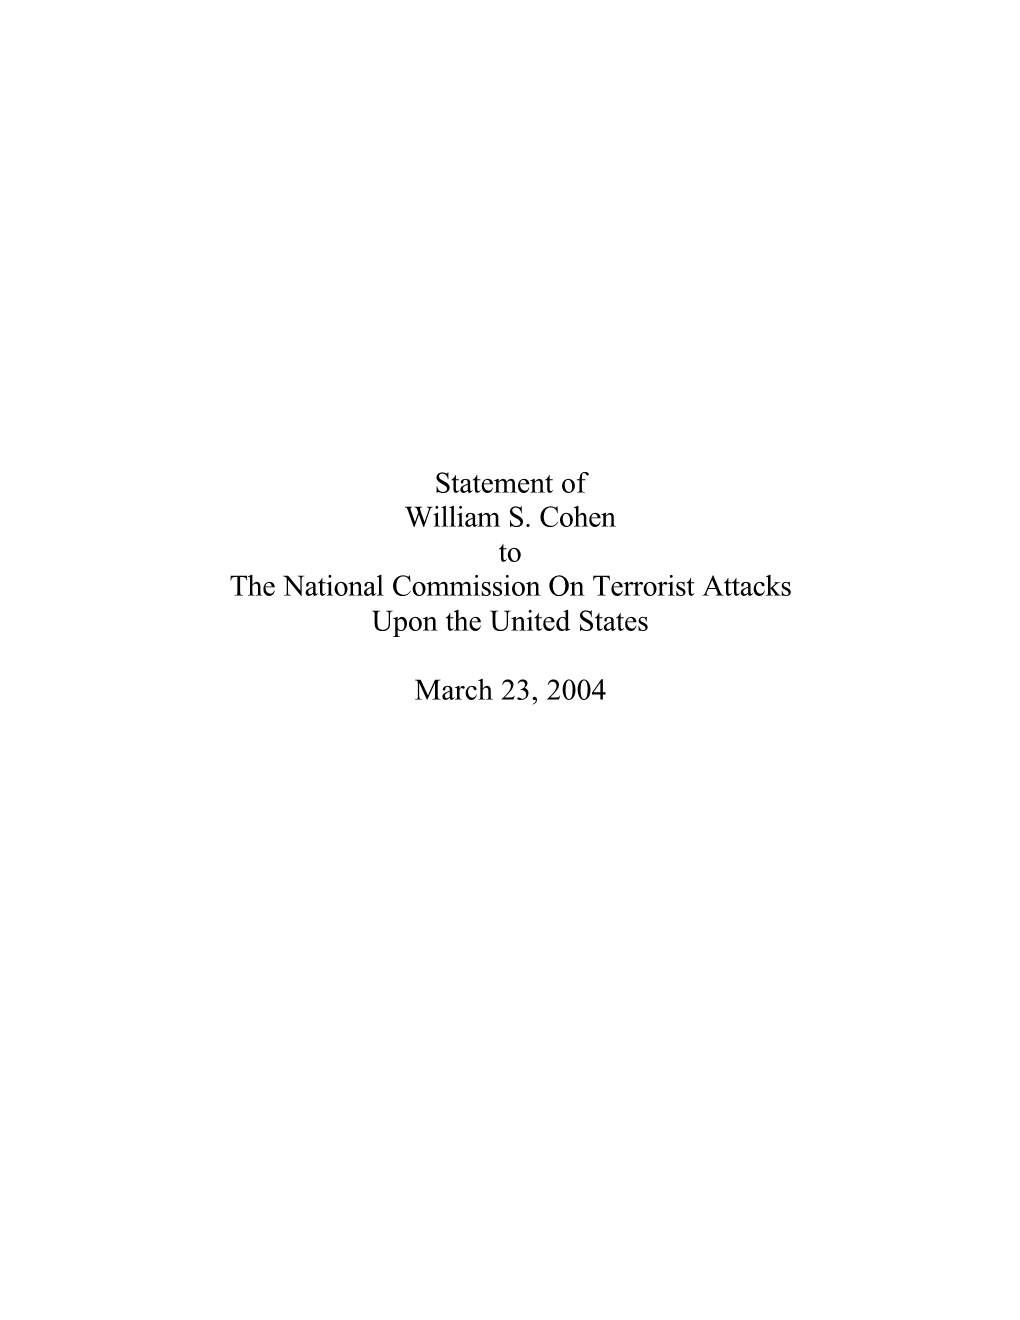 Statement of William S. Cohen to the National Commission on Terrorist Attacks Upon the United States